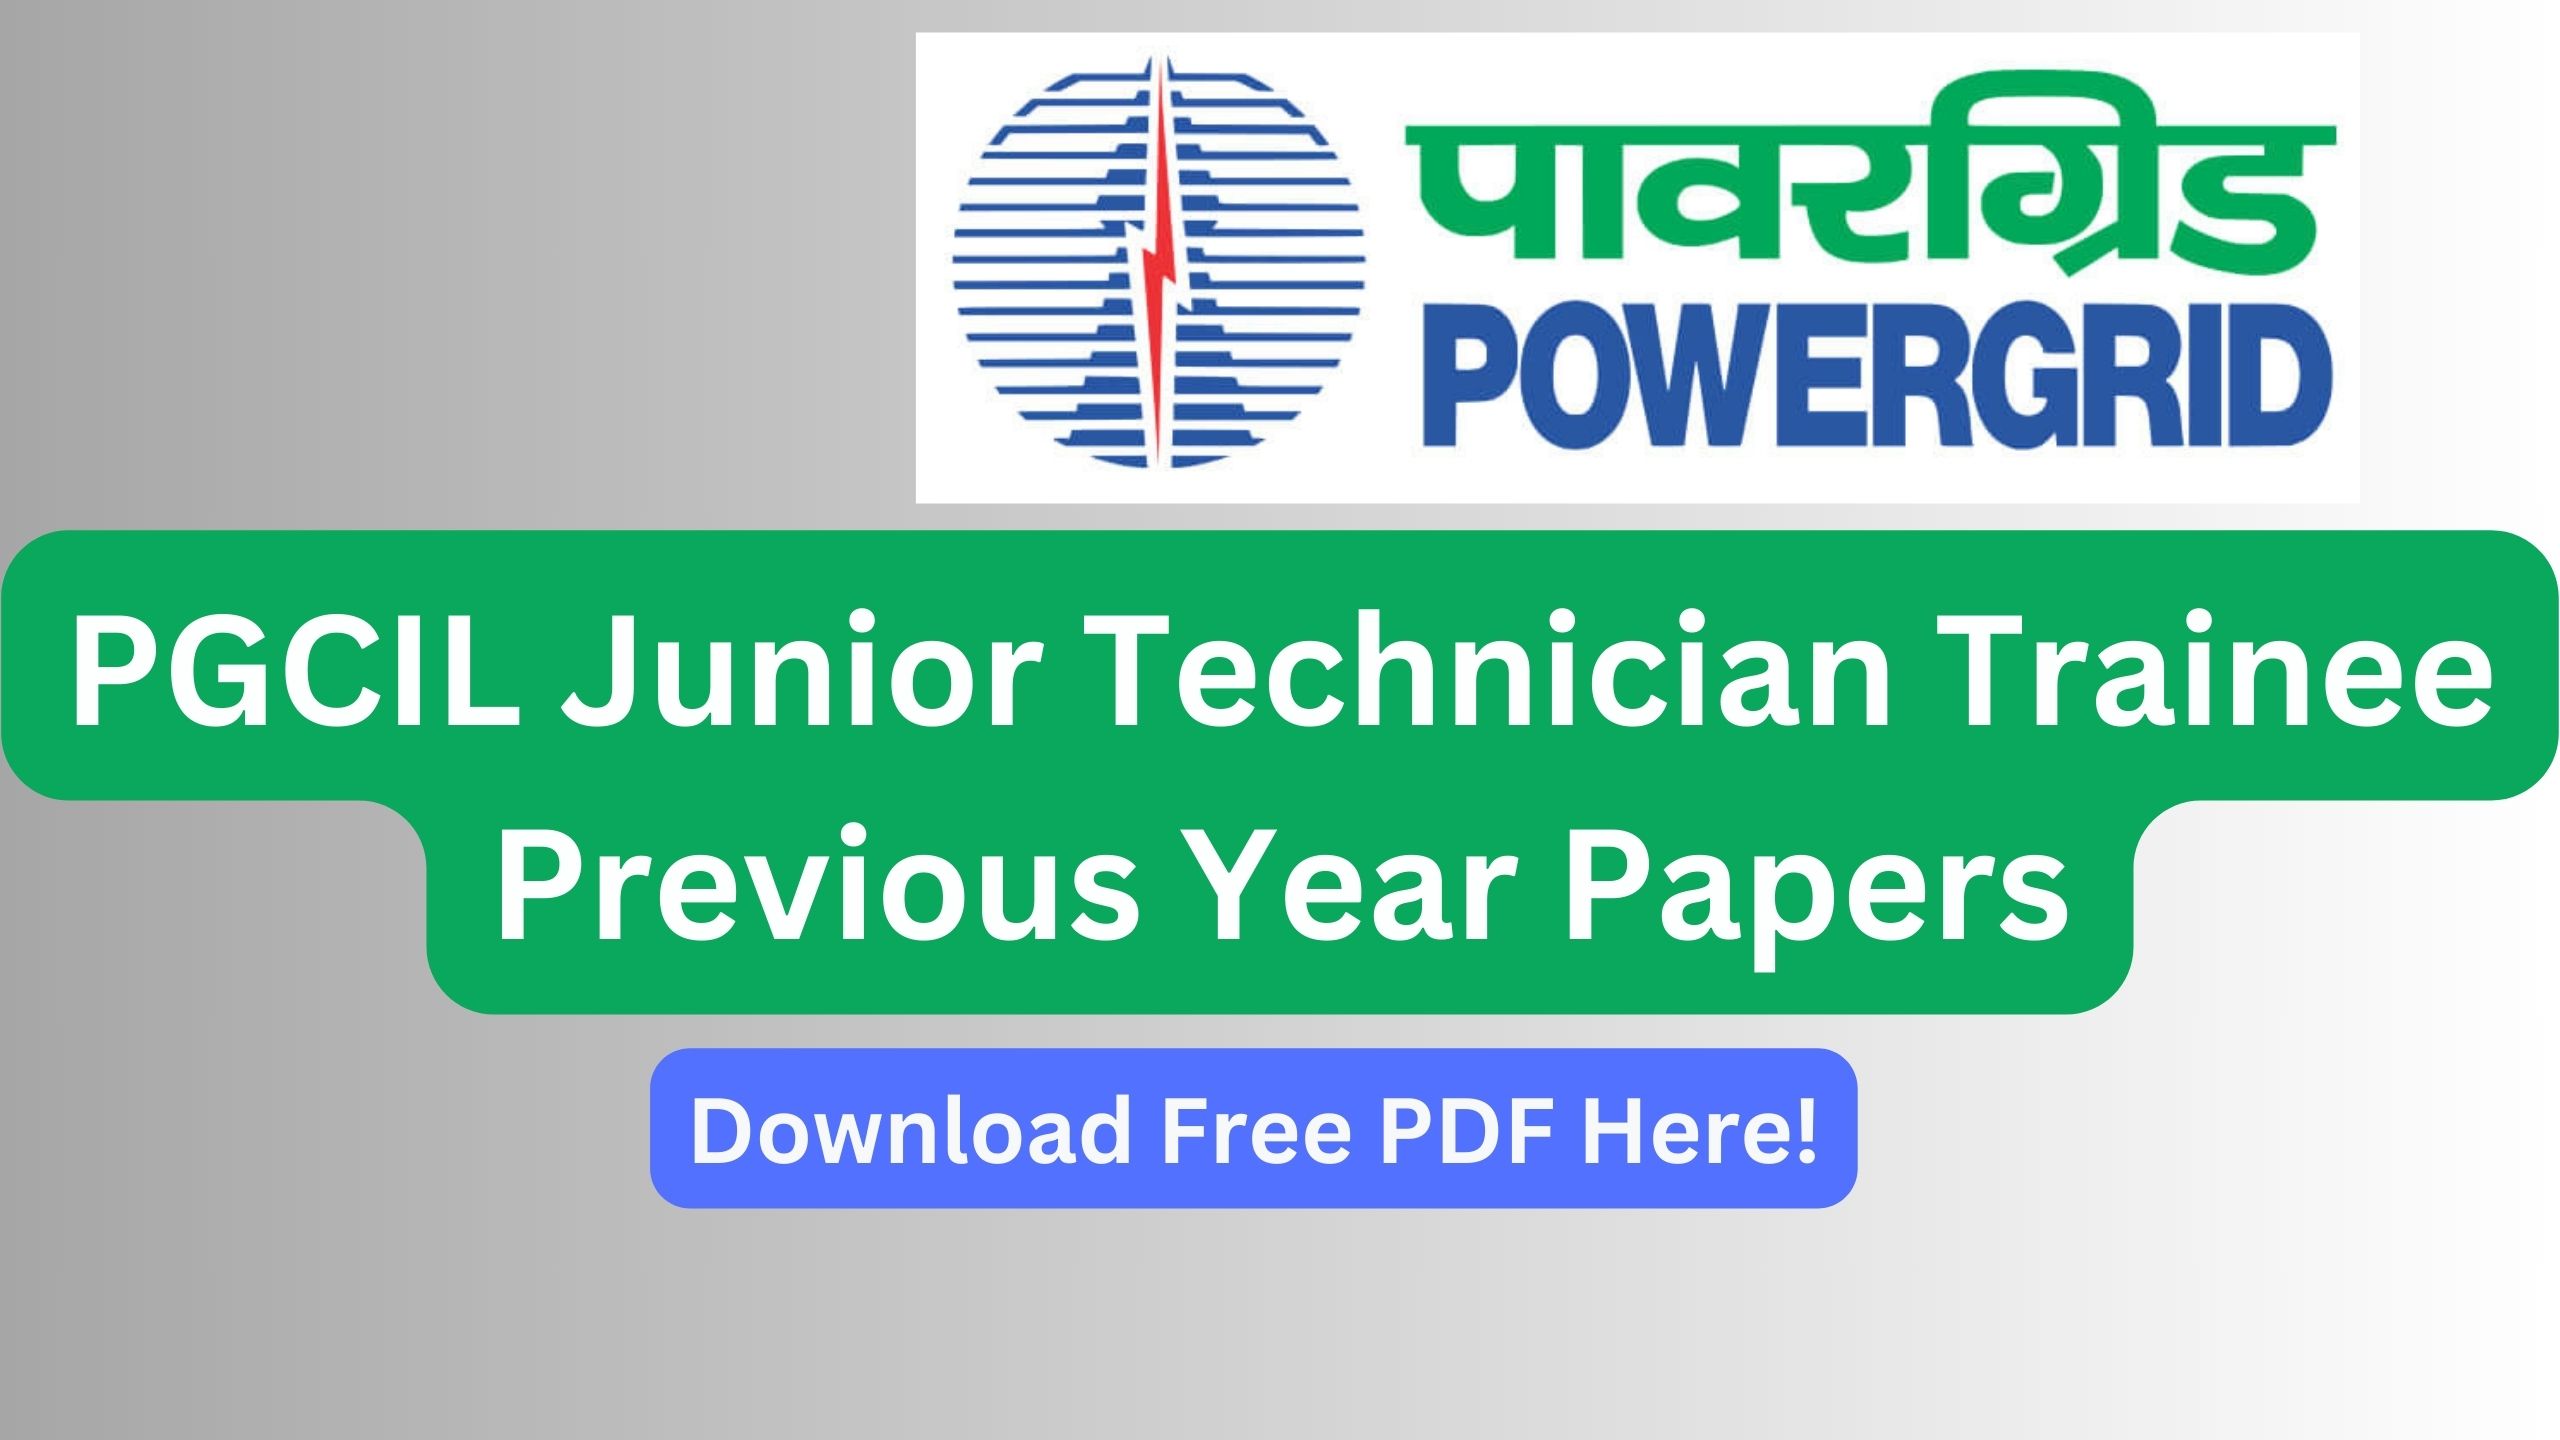 PGCIL Junior Technician Trainee Previous Year Papers